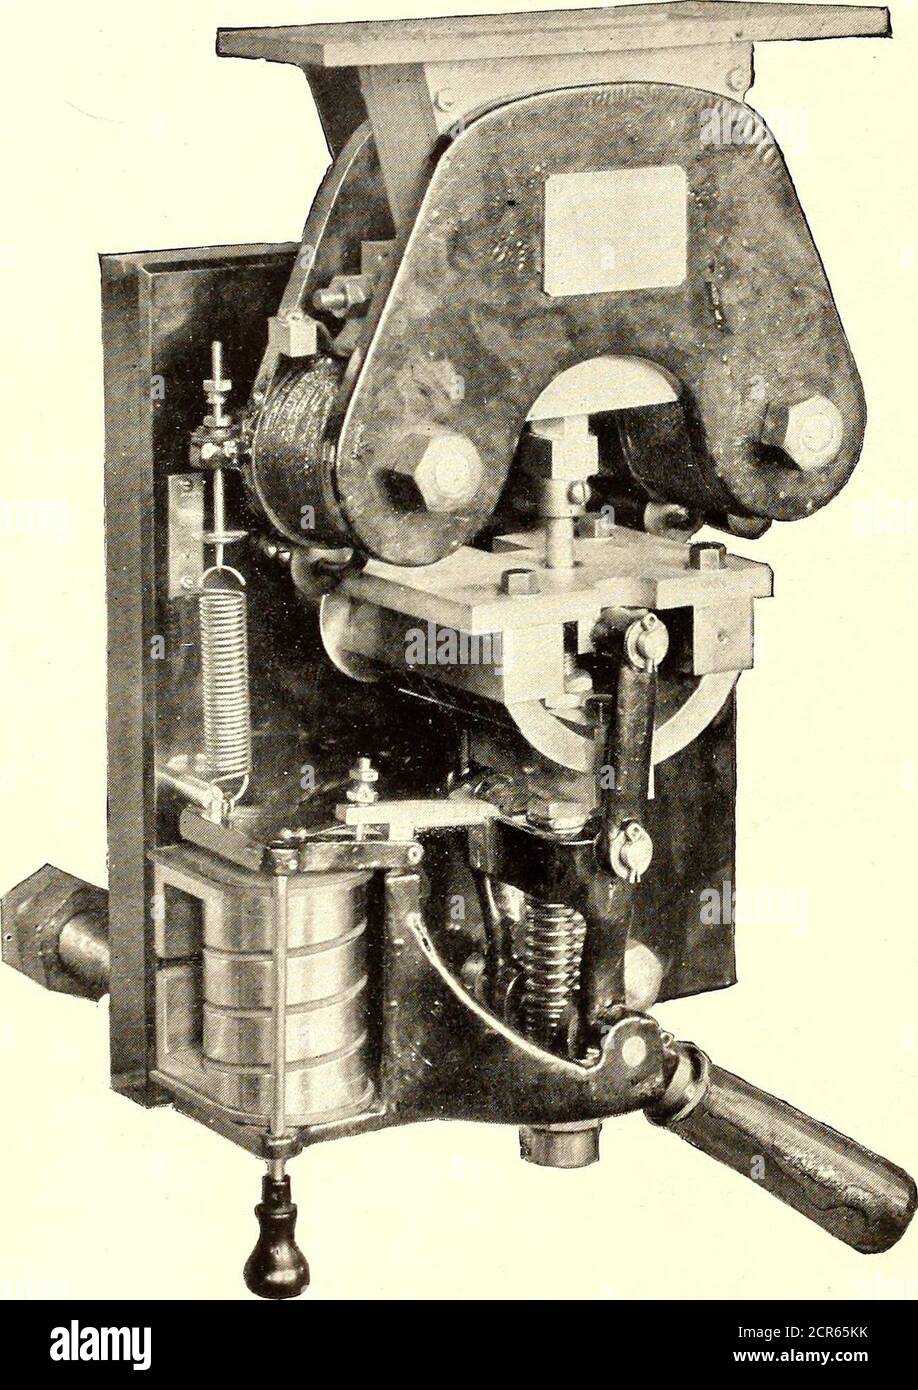 . The Street railway journal . e-fore in demand, and to meet it the General Electric Companyinvented the automatic circuit breaker shown herewith. This breaker is now constructed to meet almost every pos-sible variation of current from 150 to 3,000 amperes. The prin- poles of which enclose a chute containing supplementary con-tact points; these supplementary contacts break the circuit justafter the main contacts have separated. When the latch trips, the main bridge drops, forcing thewhole current to pass through the small magnets. This resultsin the creation of an intense magnetic field betwee Stock Photo